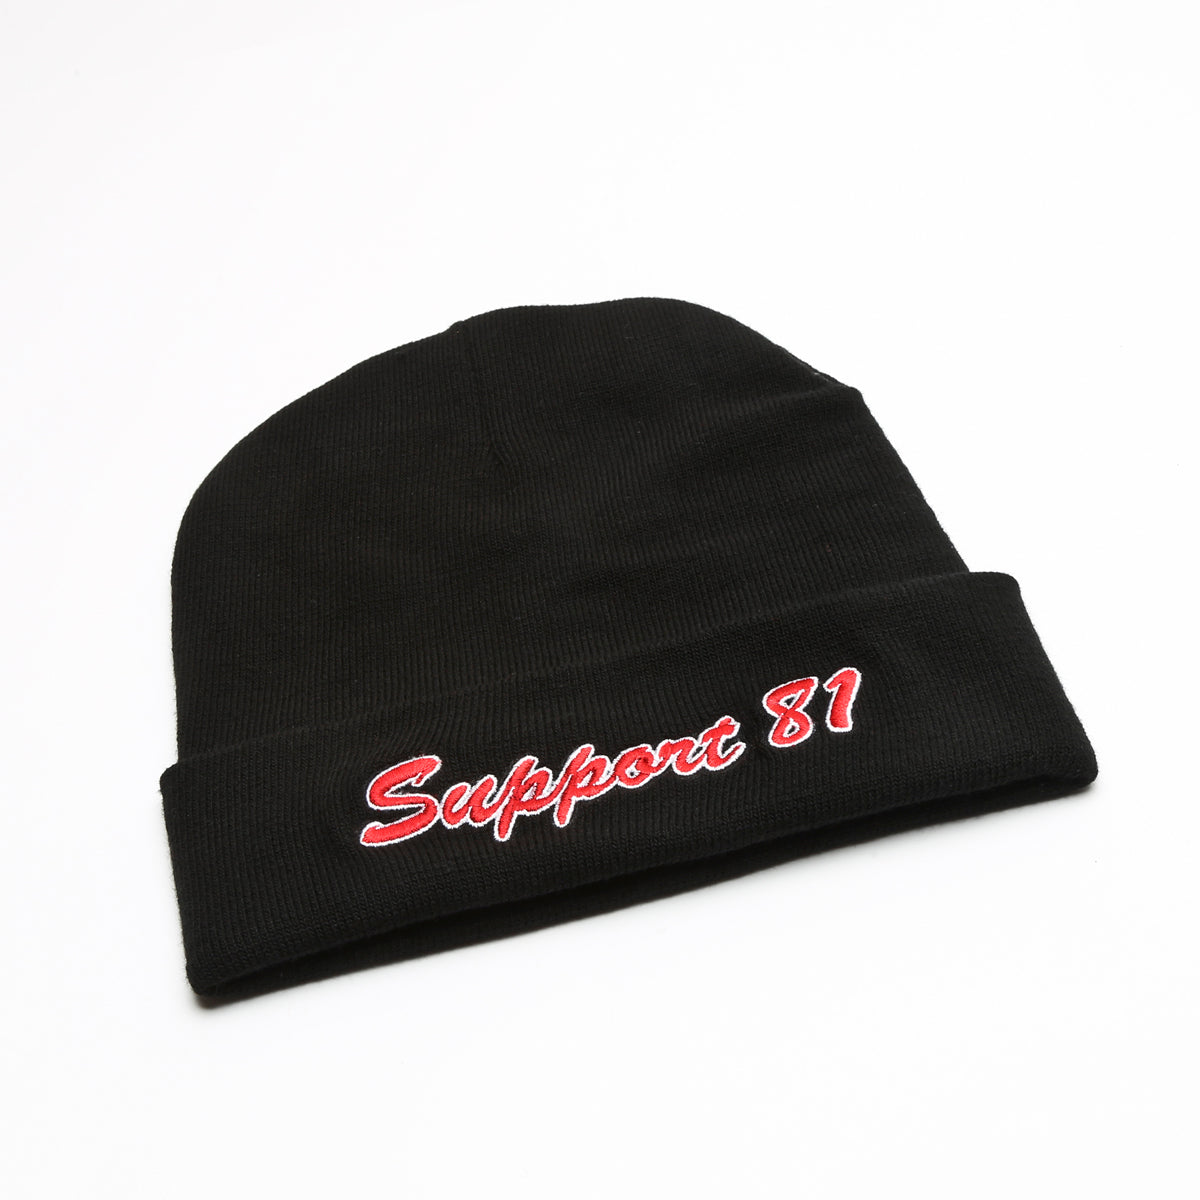 Beanie - Black - With Cuff - Support 81